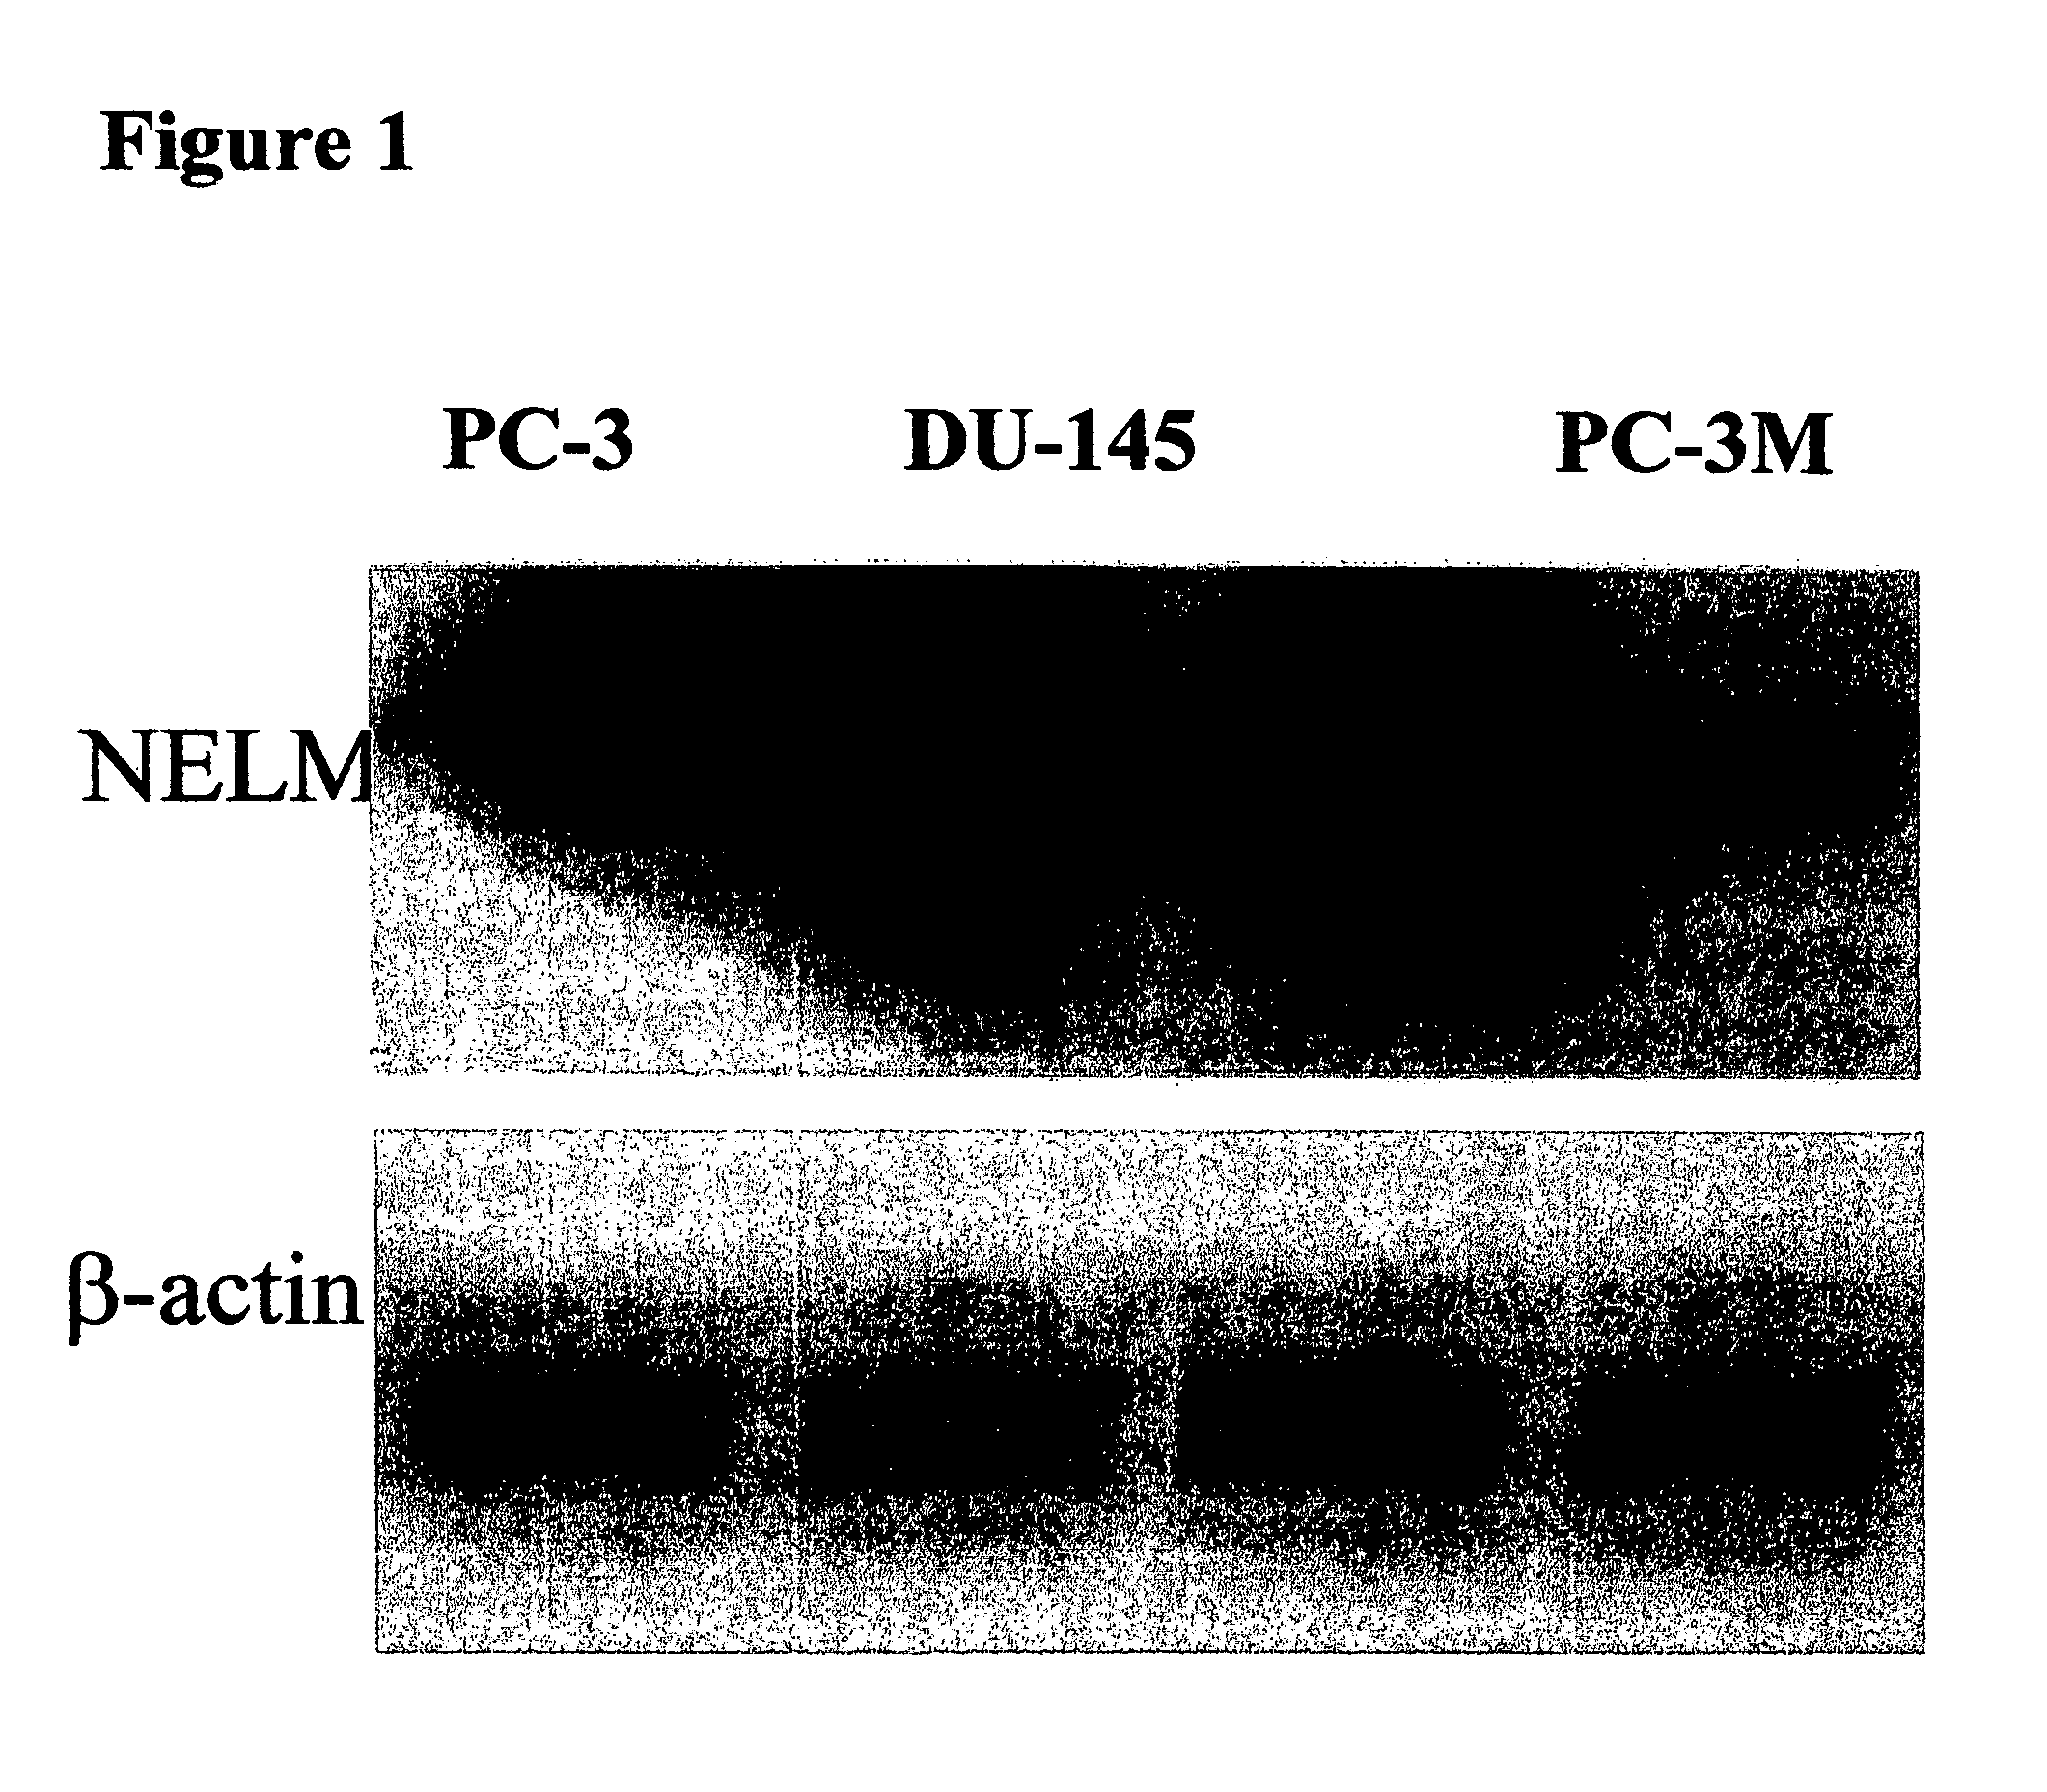 Human cancer cell specific gene transcript